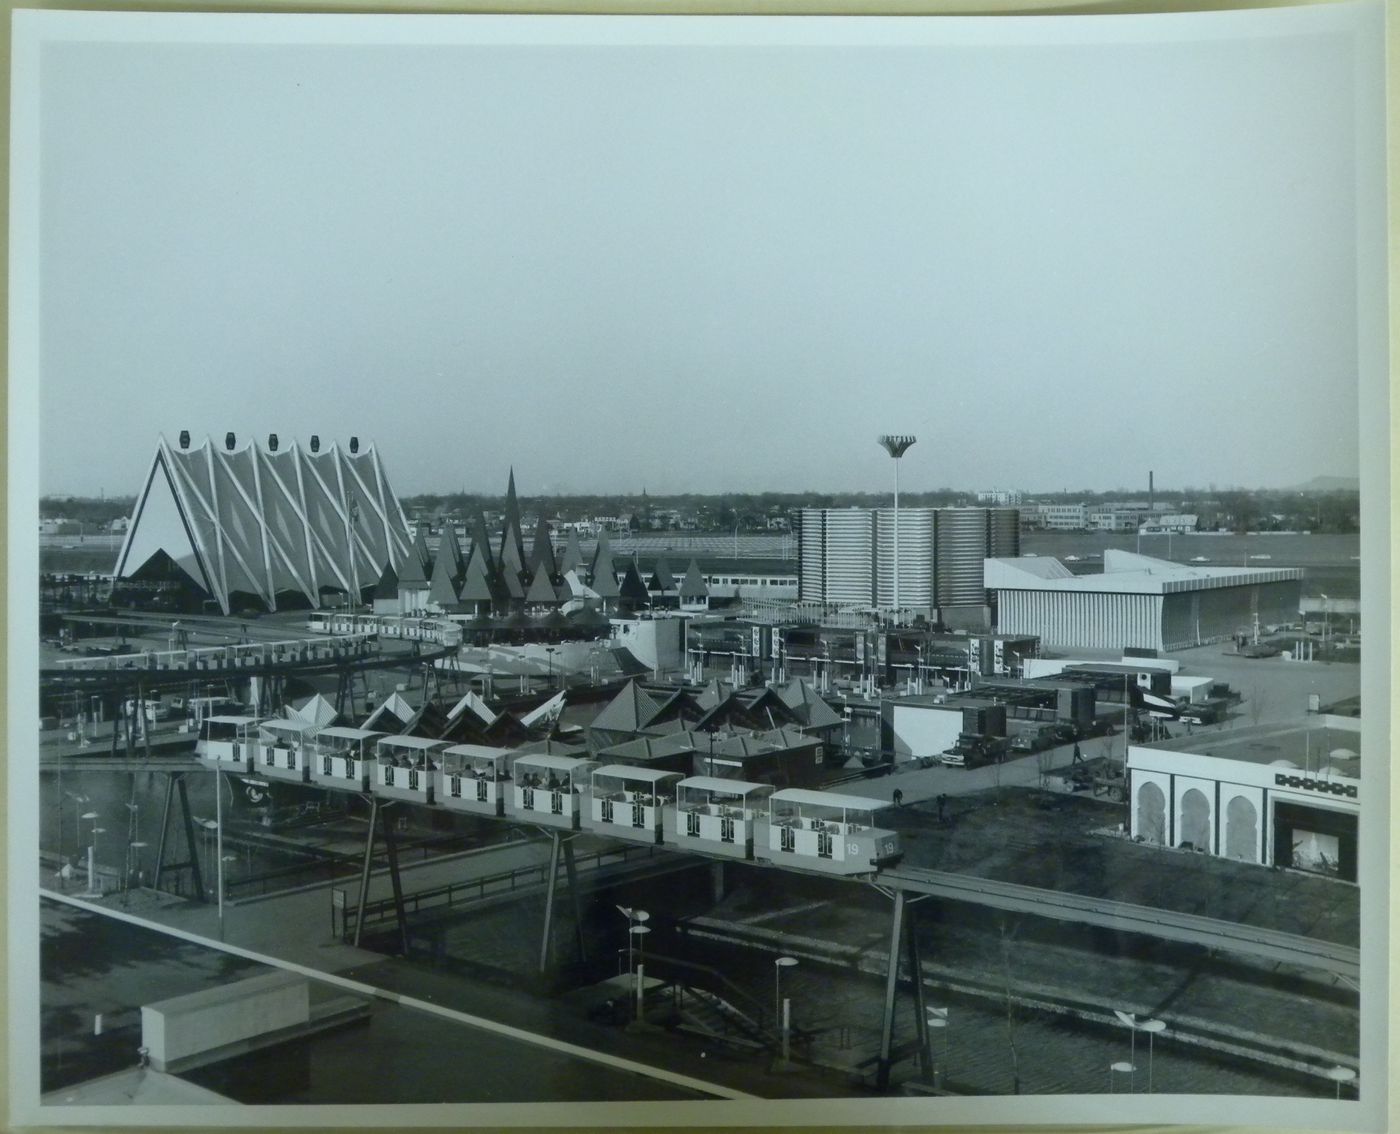 View of the Canadian Pacific-Cominco, Canadian Pulp and Paper, and Steel Pavilions with the minirail in foreground, Expo 67, Montréal, Québec